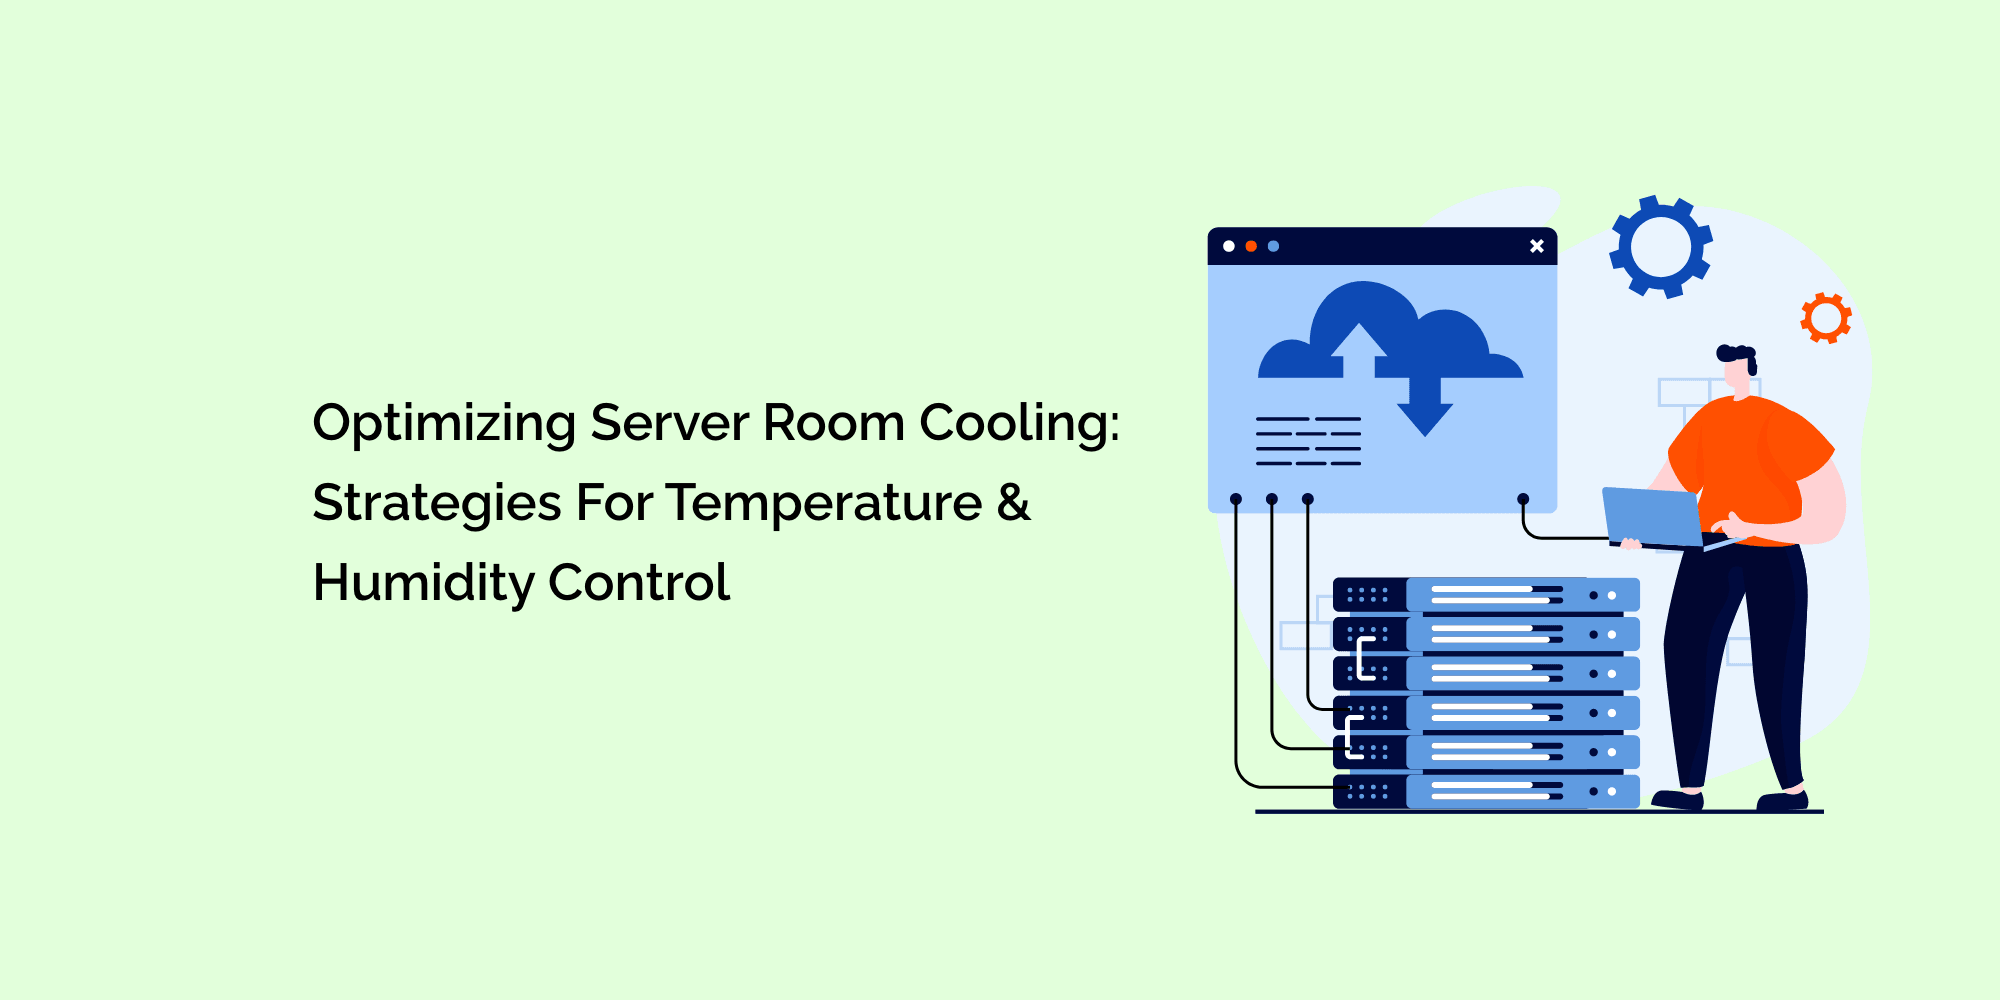 Optimizing Server Room Cooling: Strategies for Temperature & Humidity Control